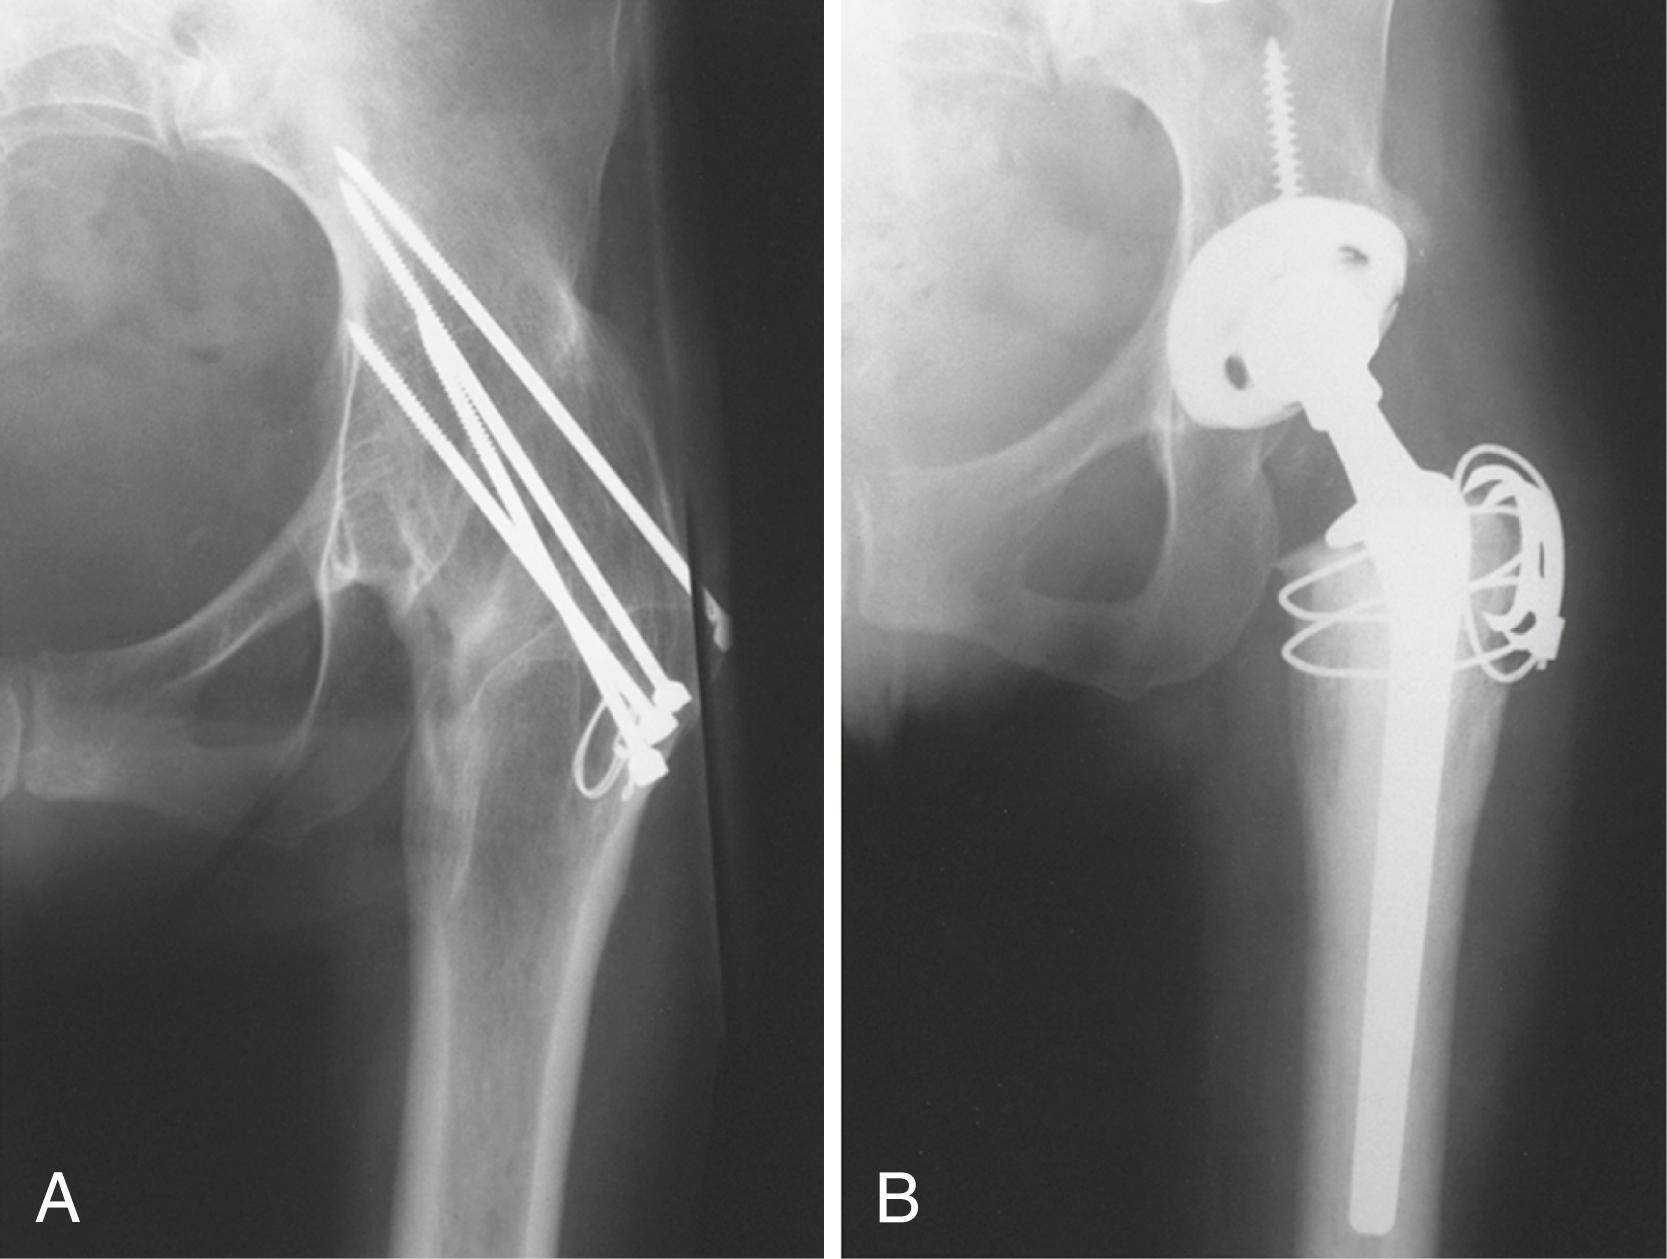 FIGURE 3.101, A, Arthrodesis in 61-year-old woman who developed disabling back pain four decades after successful arthrodesis of hip. B, After conversion to hybrid total hip arthroplasty. Trochanteric osteotomy provided excellent exposure. Patient had persistent Trendelenburg limp after surgery, but back pain had diminished.